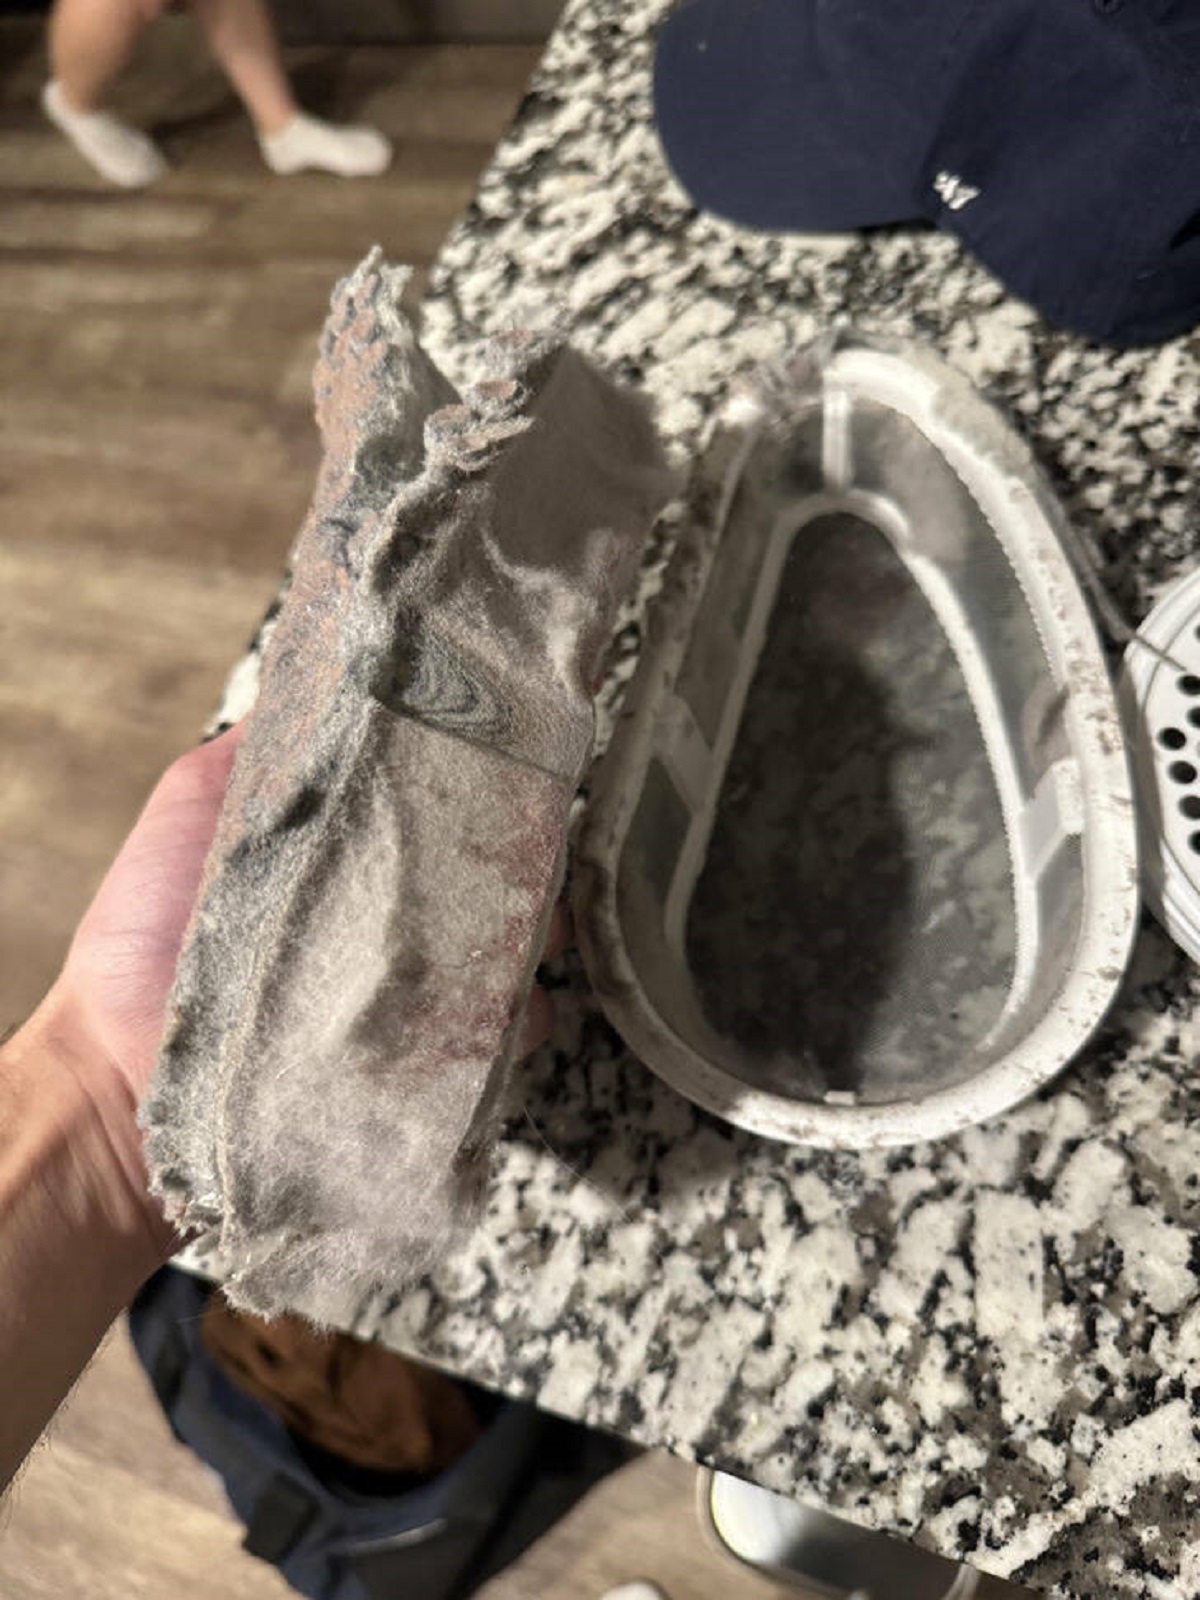 “My girlfriend didn’t clean out the dryer lint trap for 6 months.”